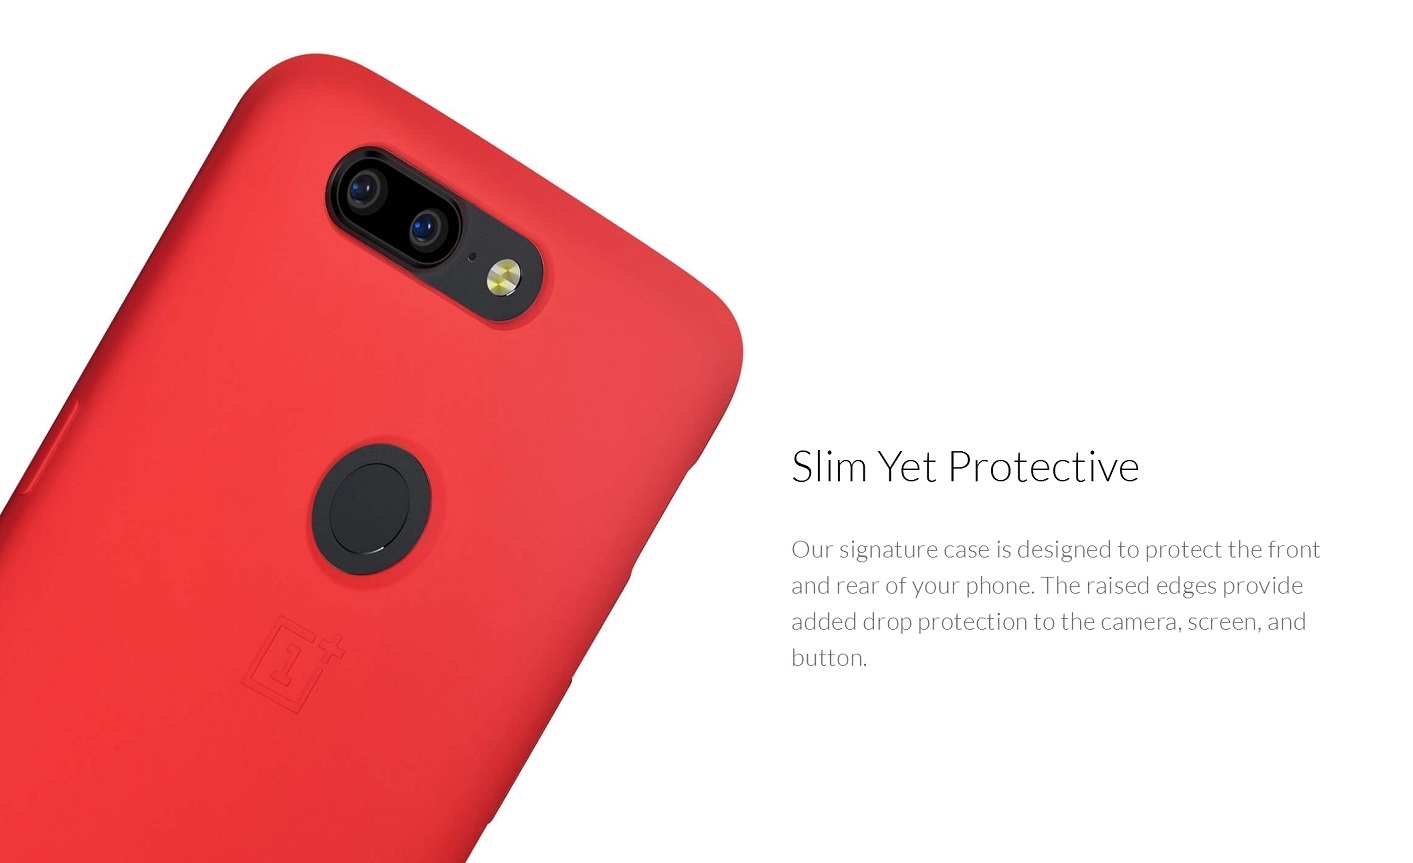 OnePlus 5T Silicone Protective Case